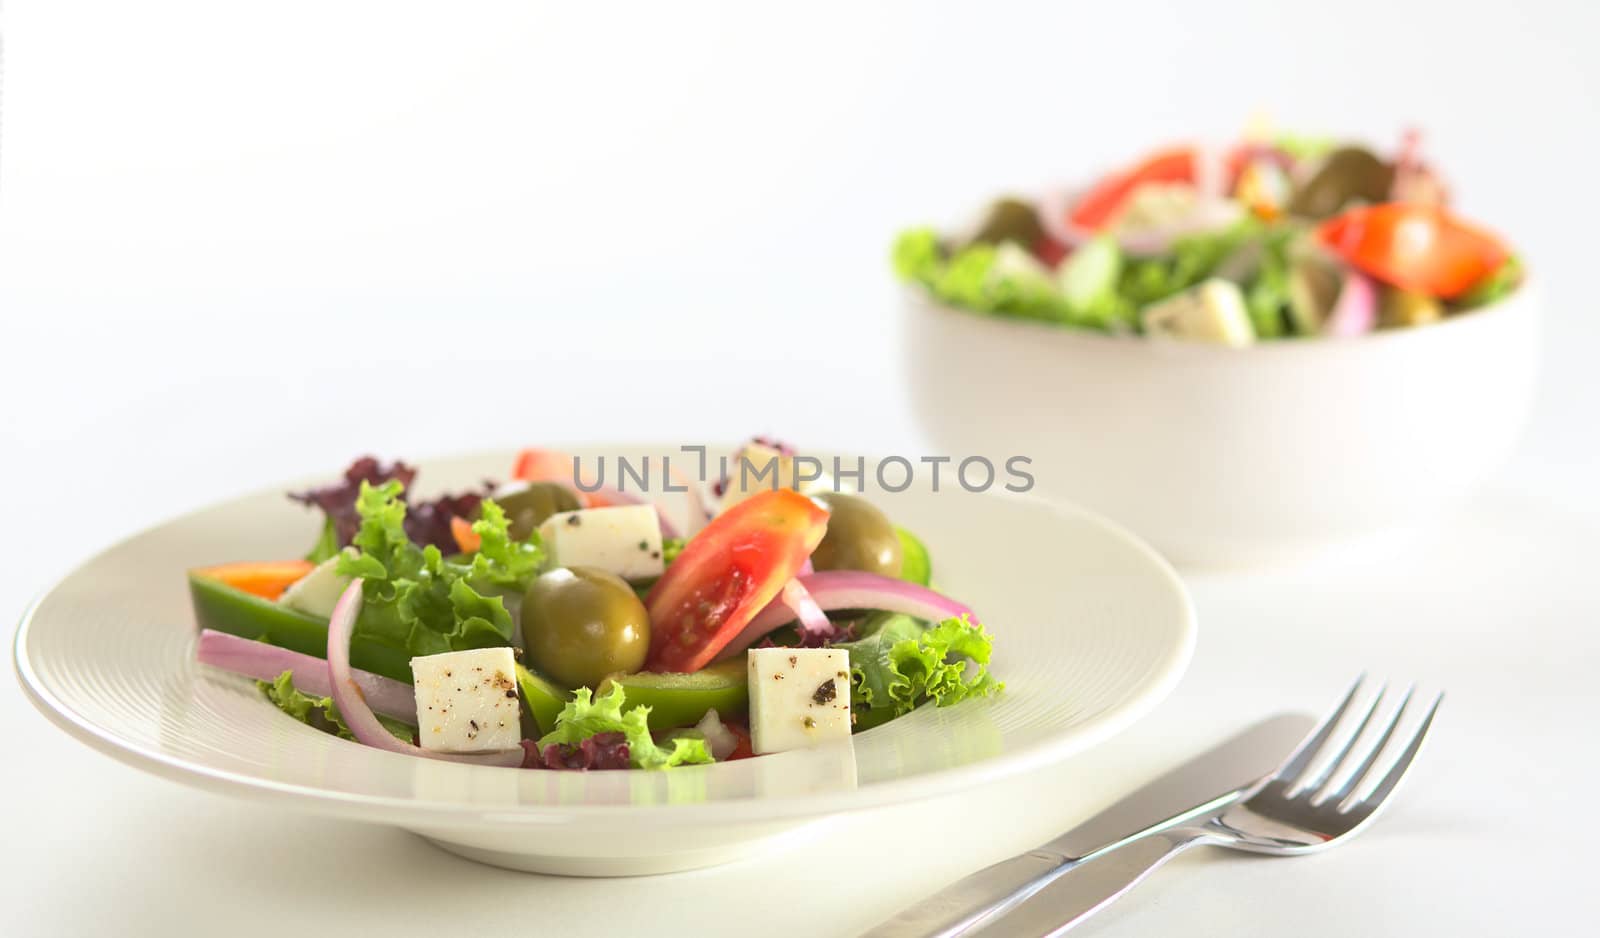 Greek salad out of white cheese, olives, red onions, tomato, bell pepper, cucumber and lettuce with herbs (Selective Focus, Focus on the front of the salad) 